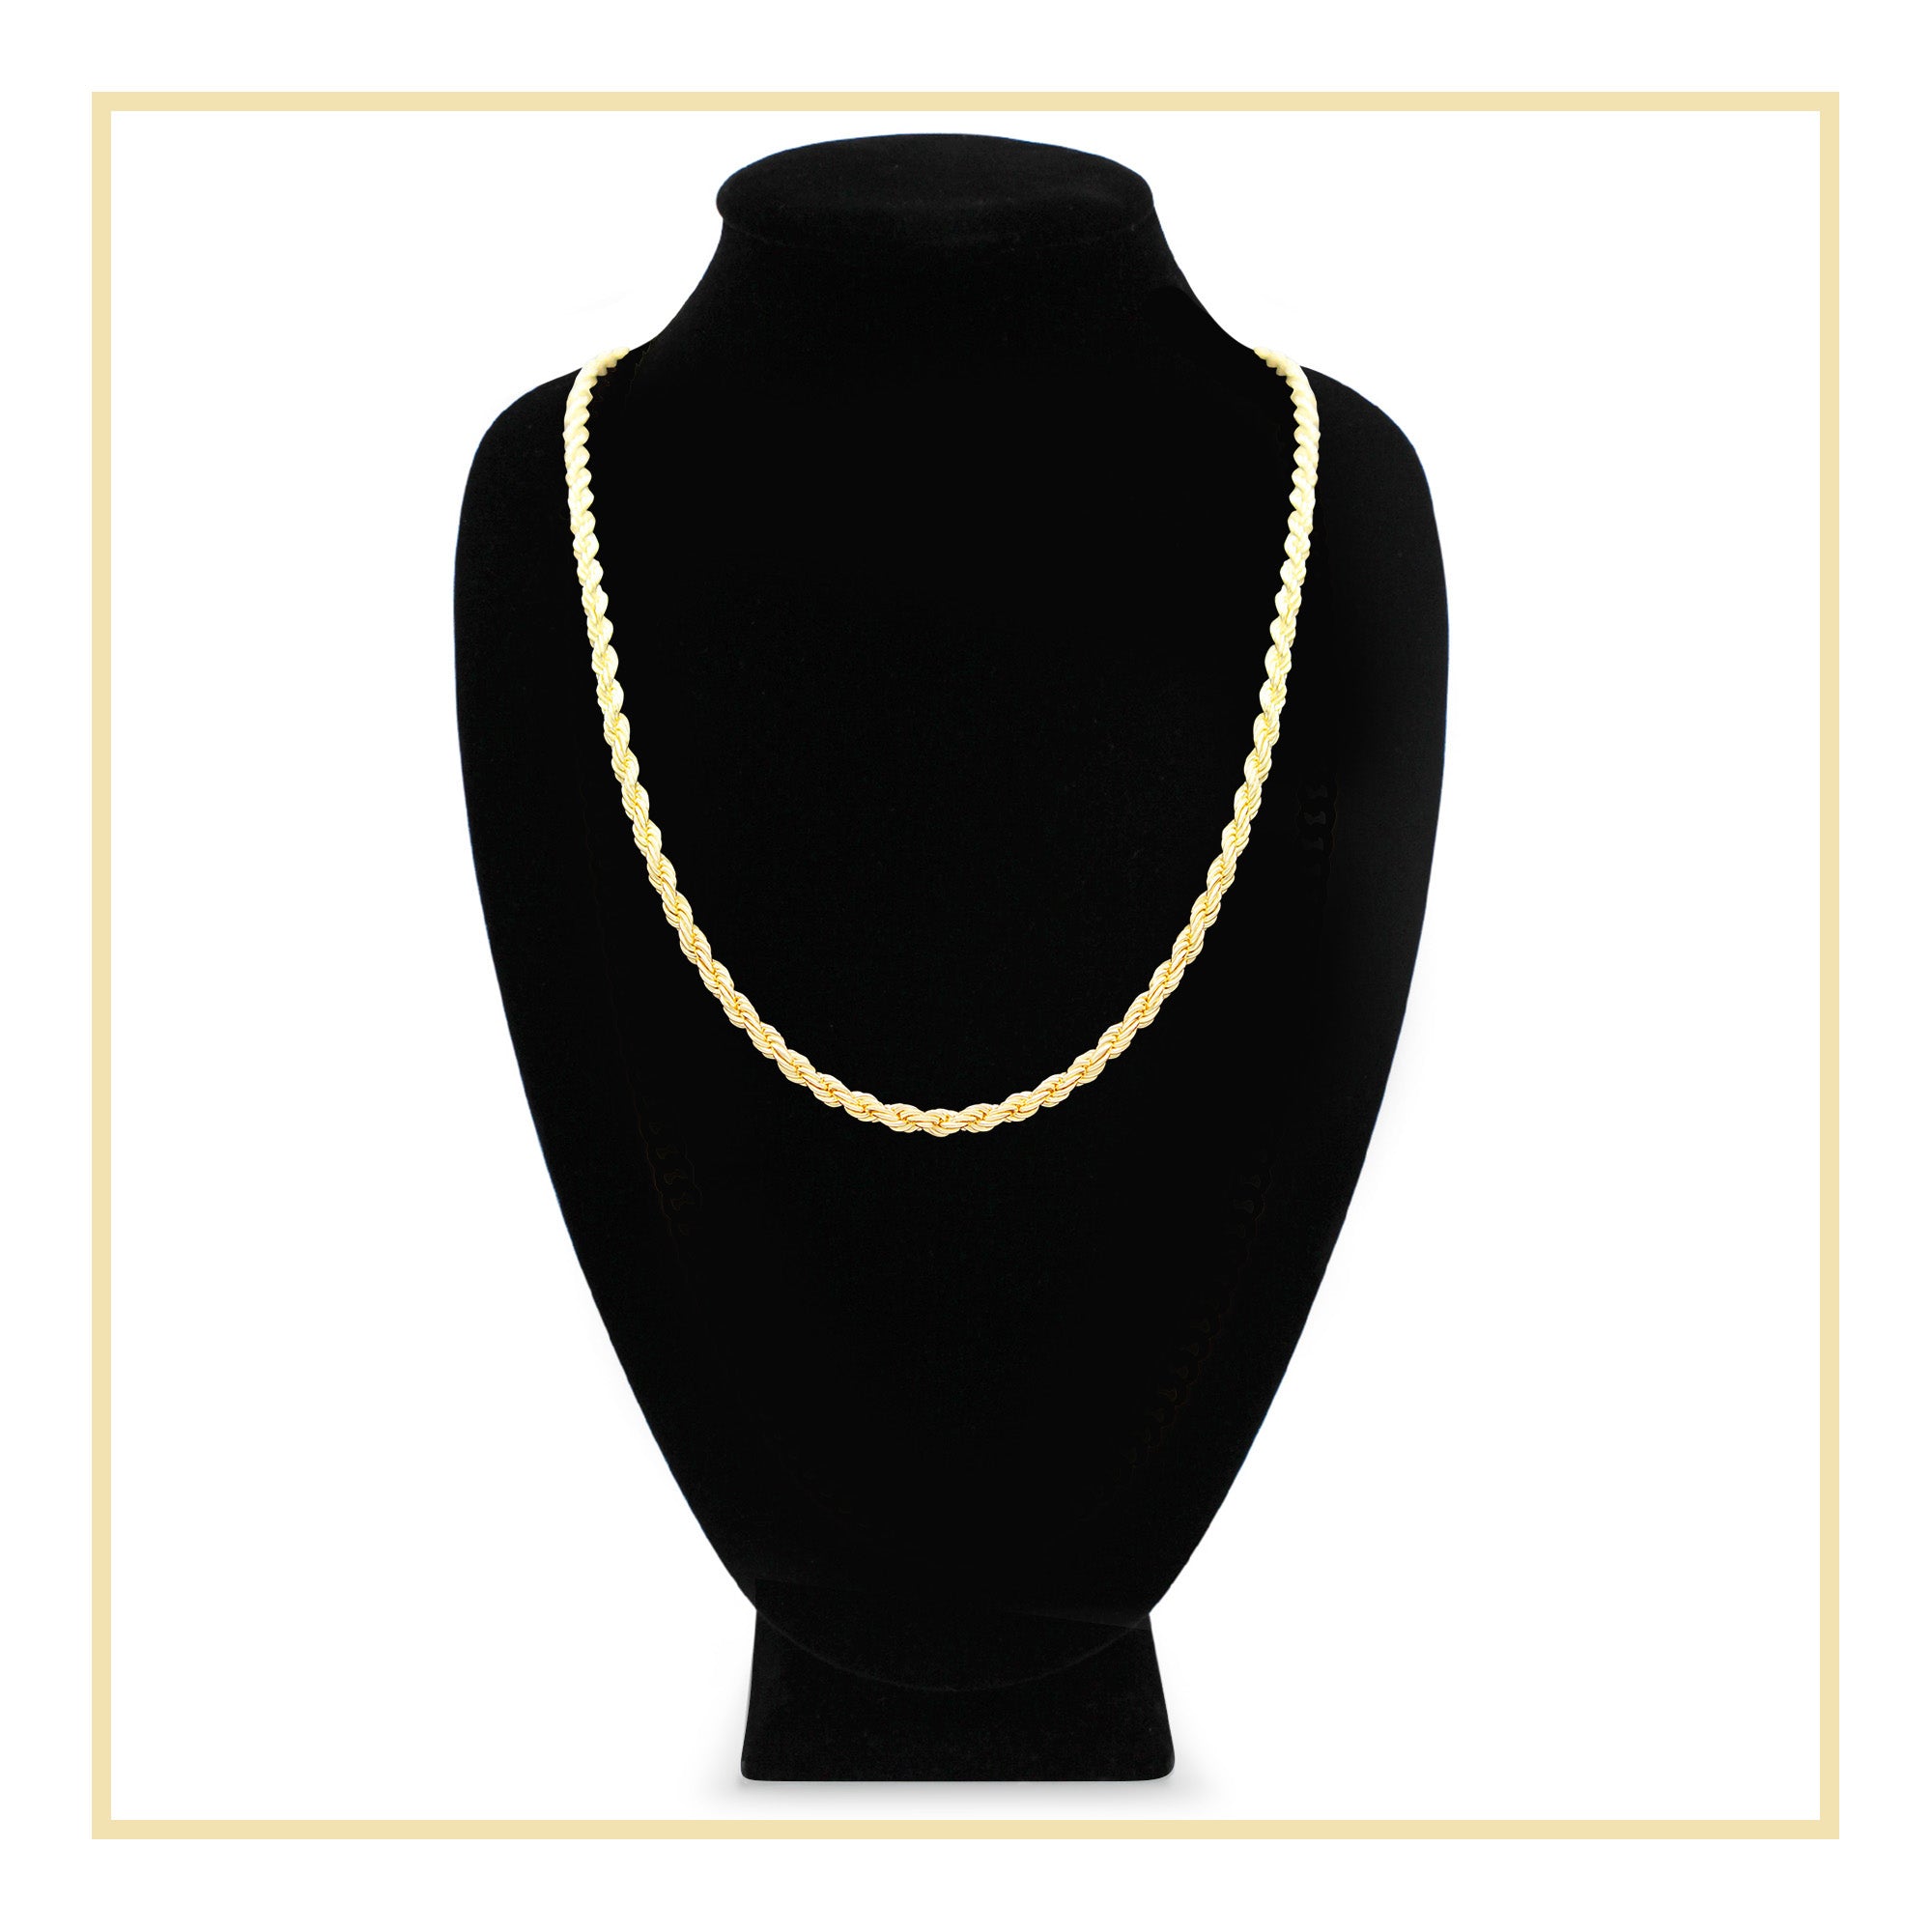 14K Gold Filled Rope Chain Necklace 24" for Men 5-6 mm